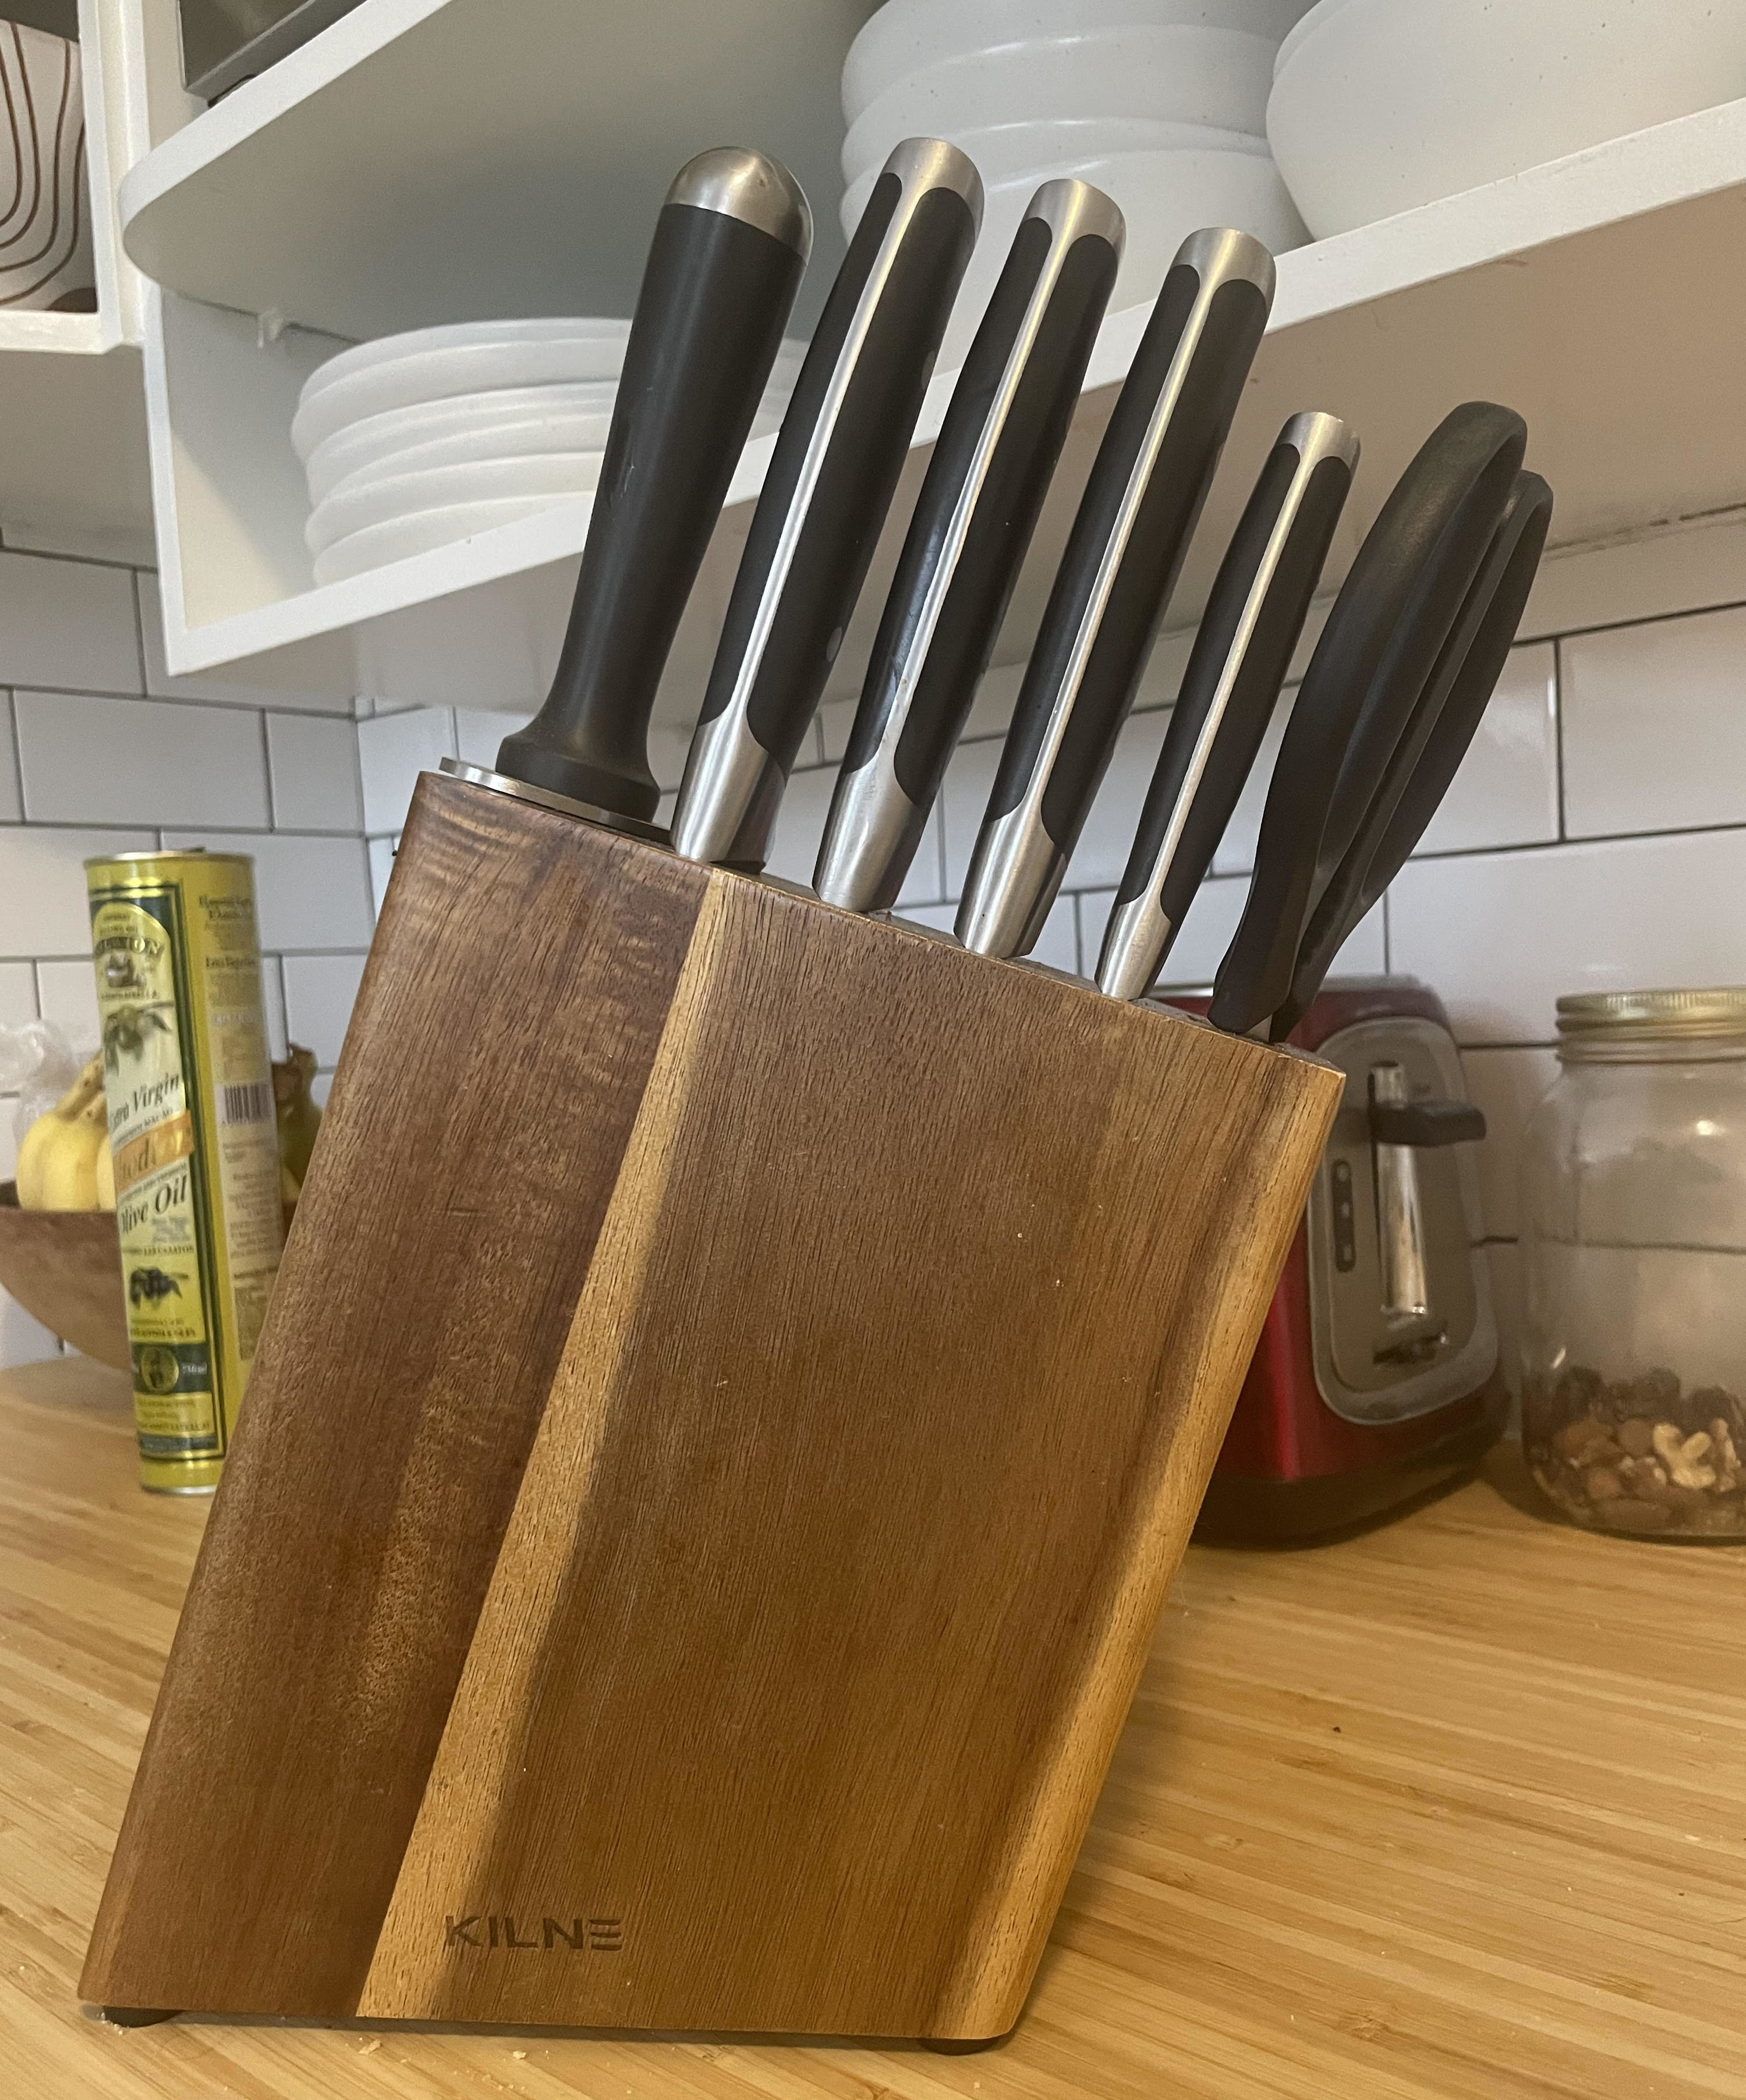 The knife block on a counter